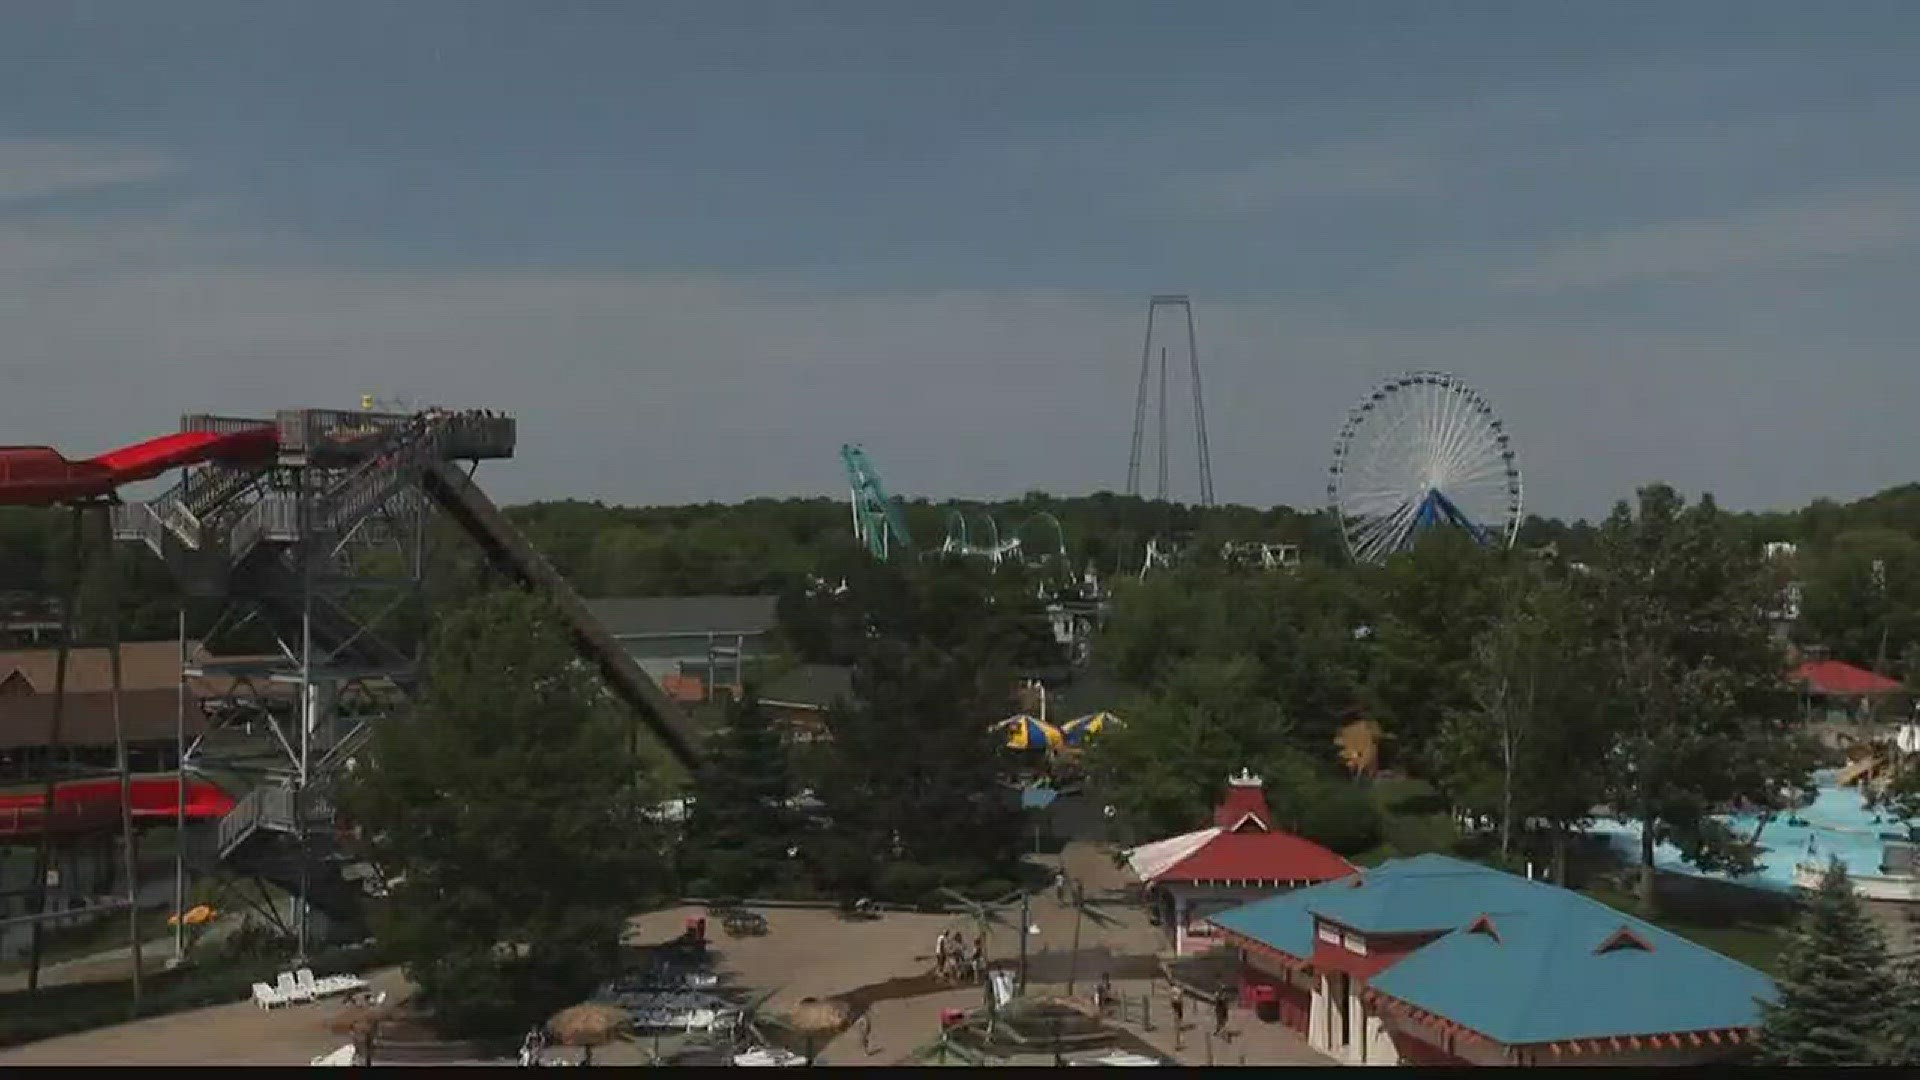 Darien Lake ride passes inspection after people were hurt